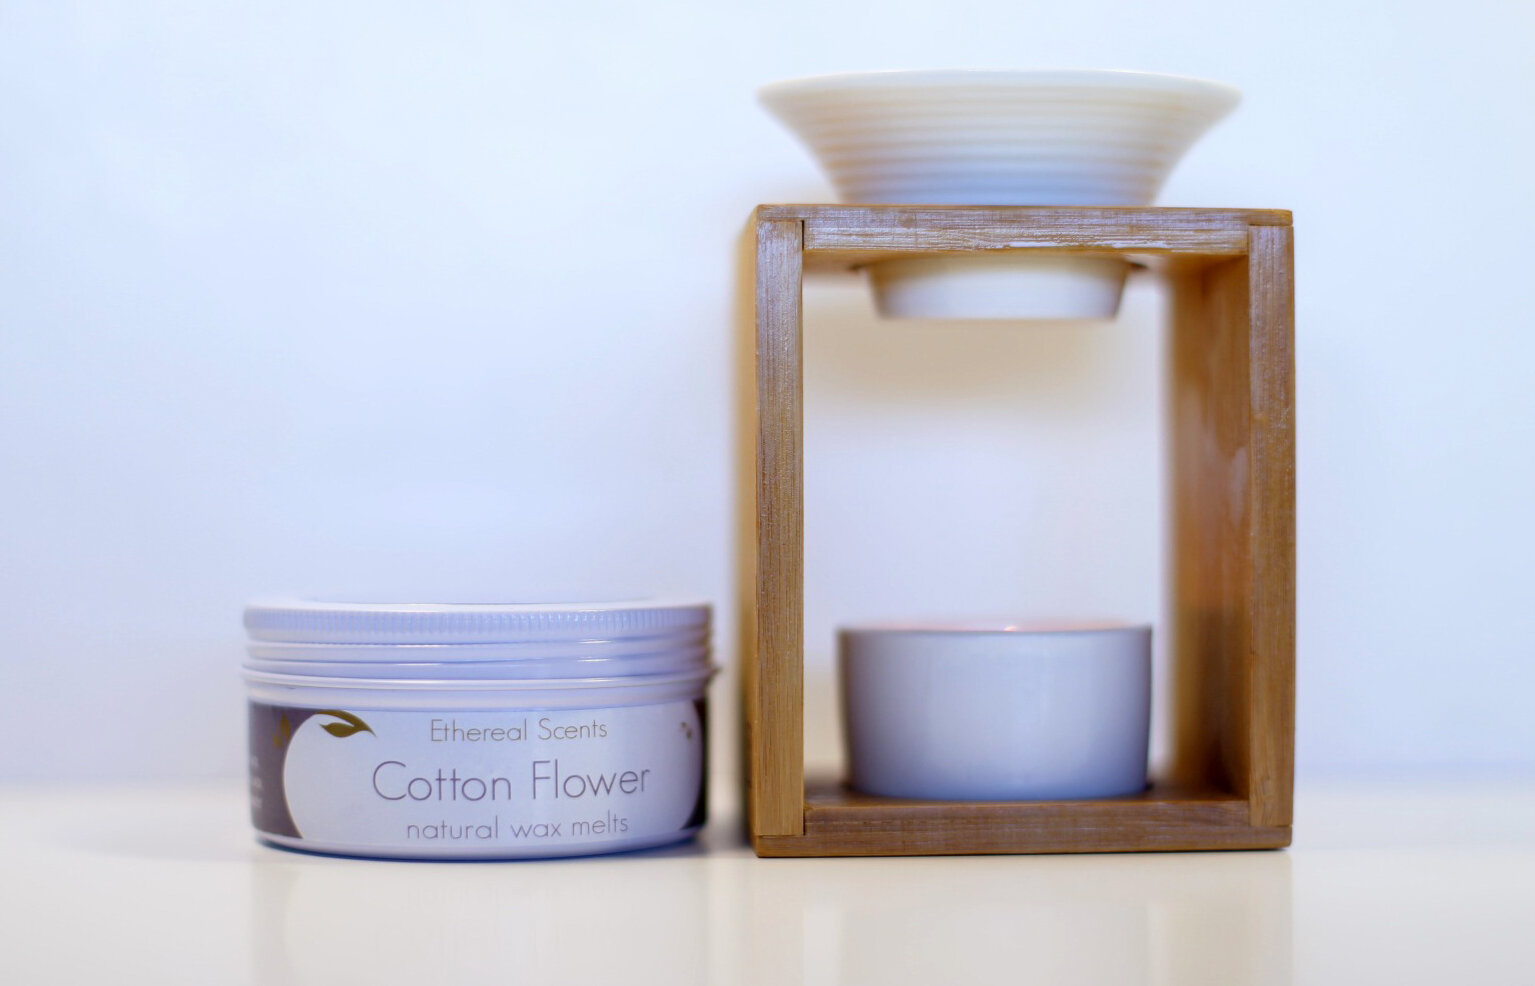 Cotton Flower wax melts by Ethereal Scents